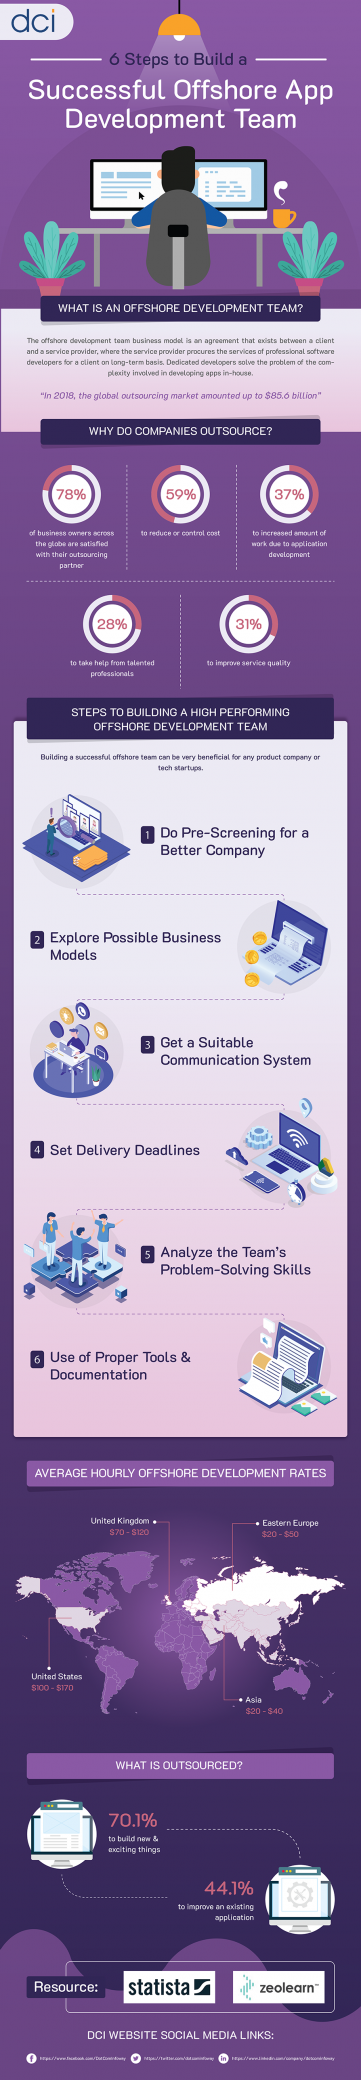 6 Steps to Build a Successful Offshore App Development Team [Infographic]